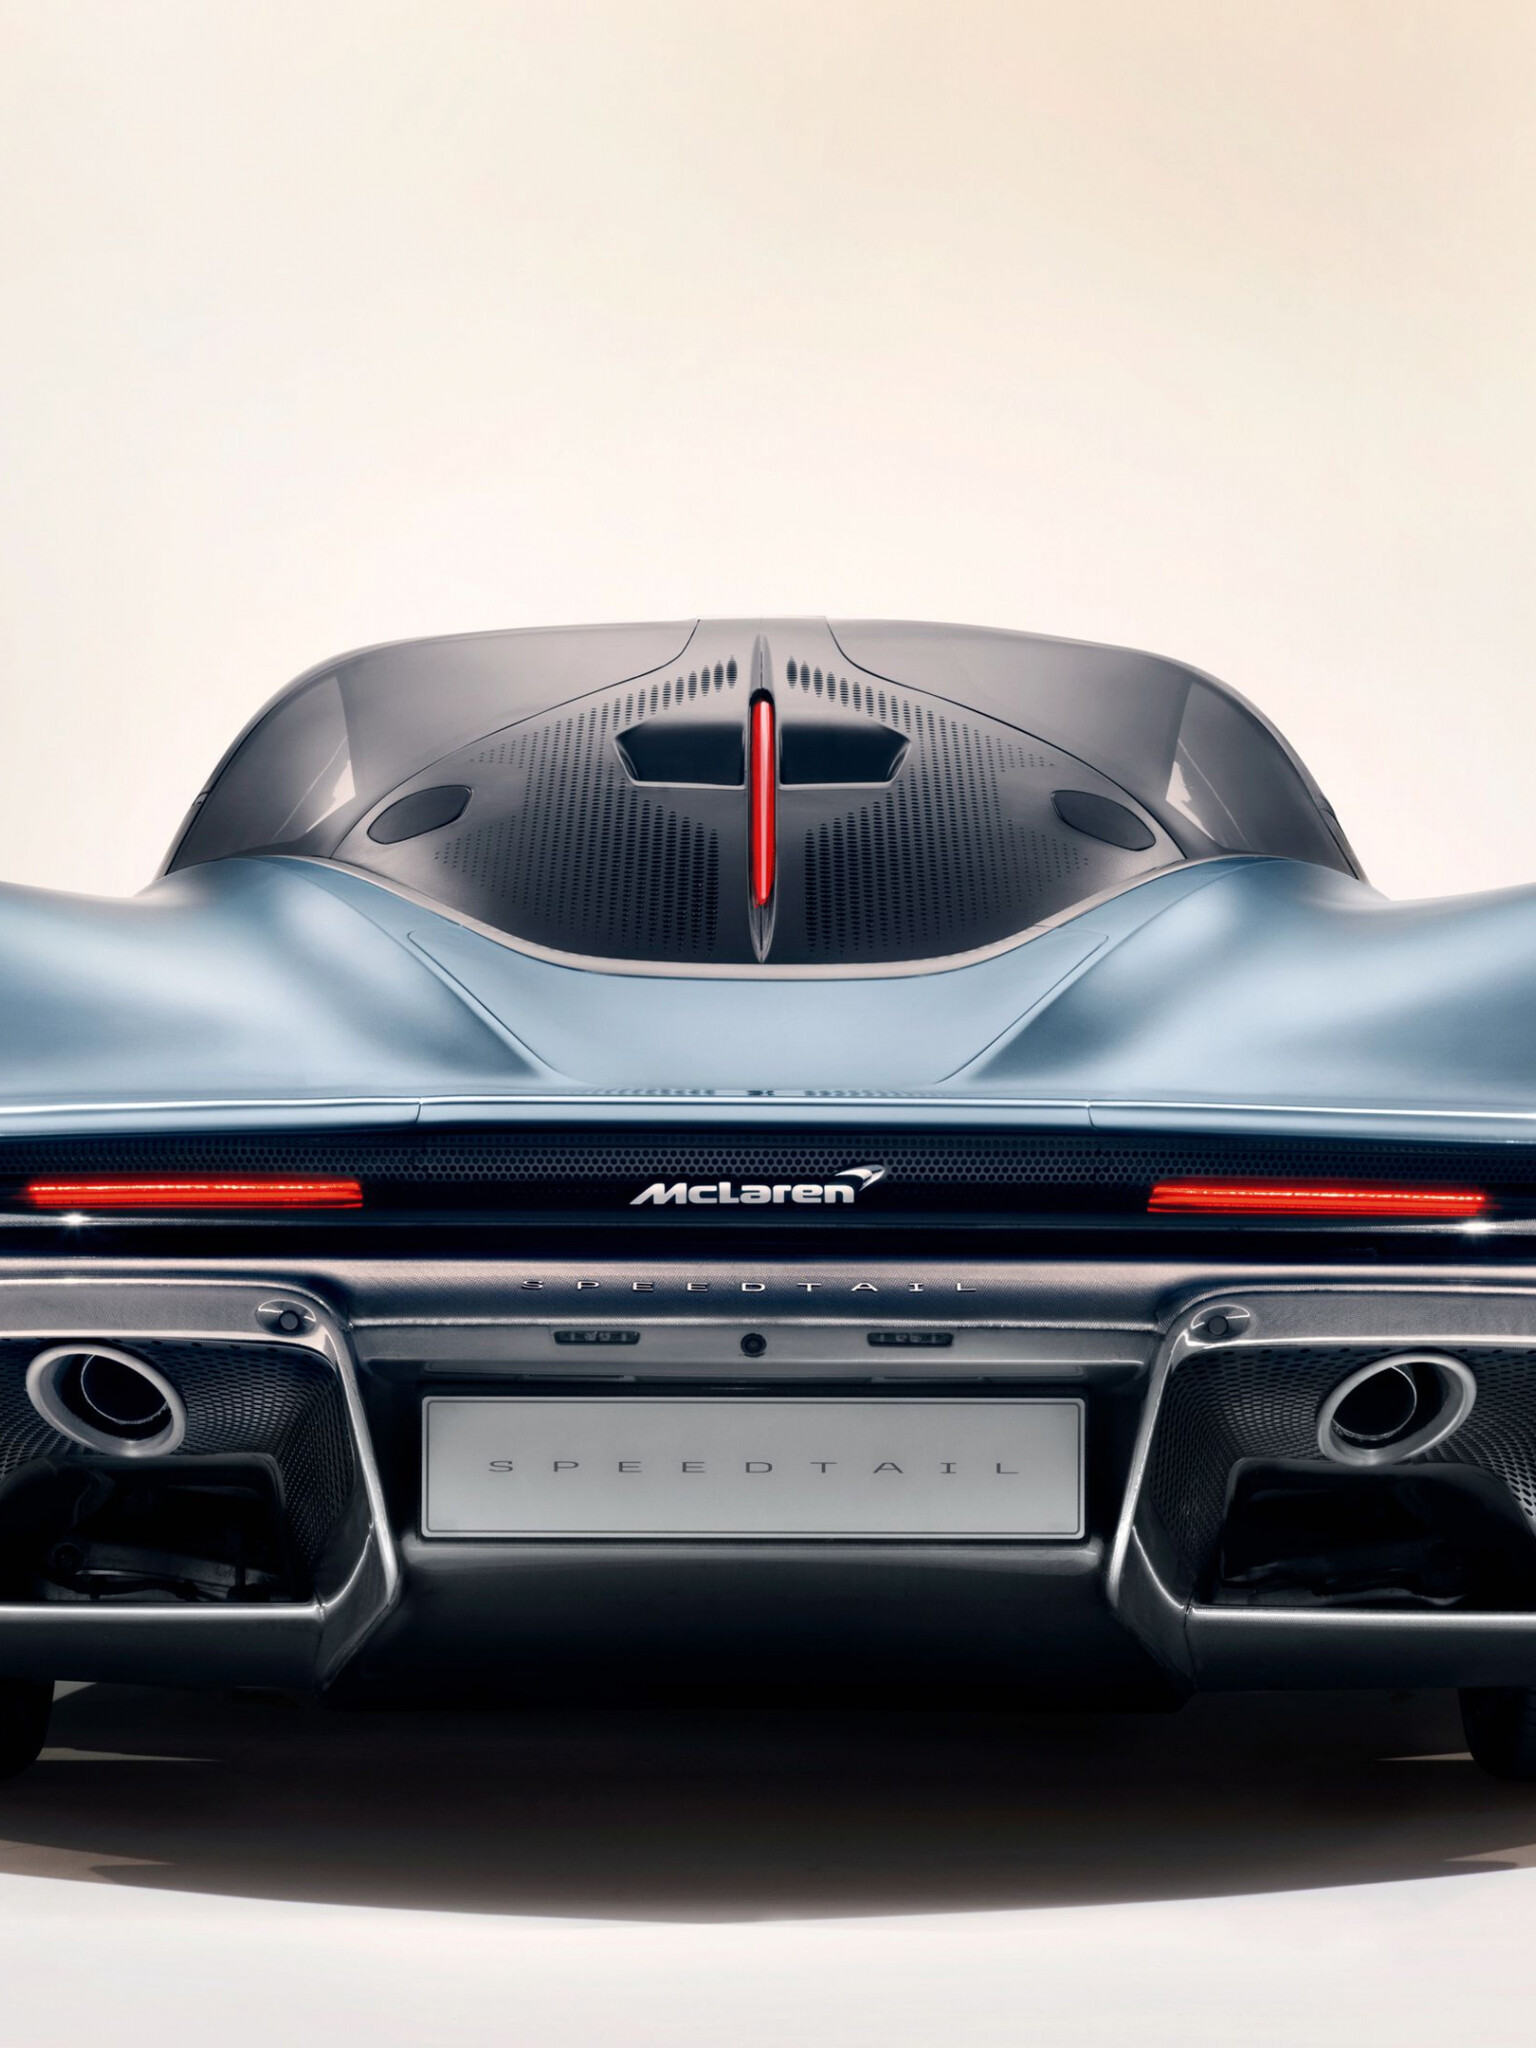 McLaren: Speedtail, A limited-production hybrid sports car, Revealed on October 26, 2018. 1540x2050 HD Wallpaper.